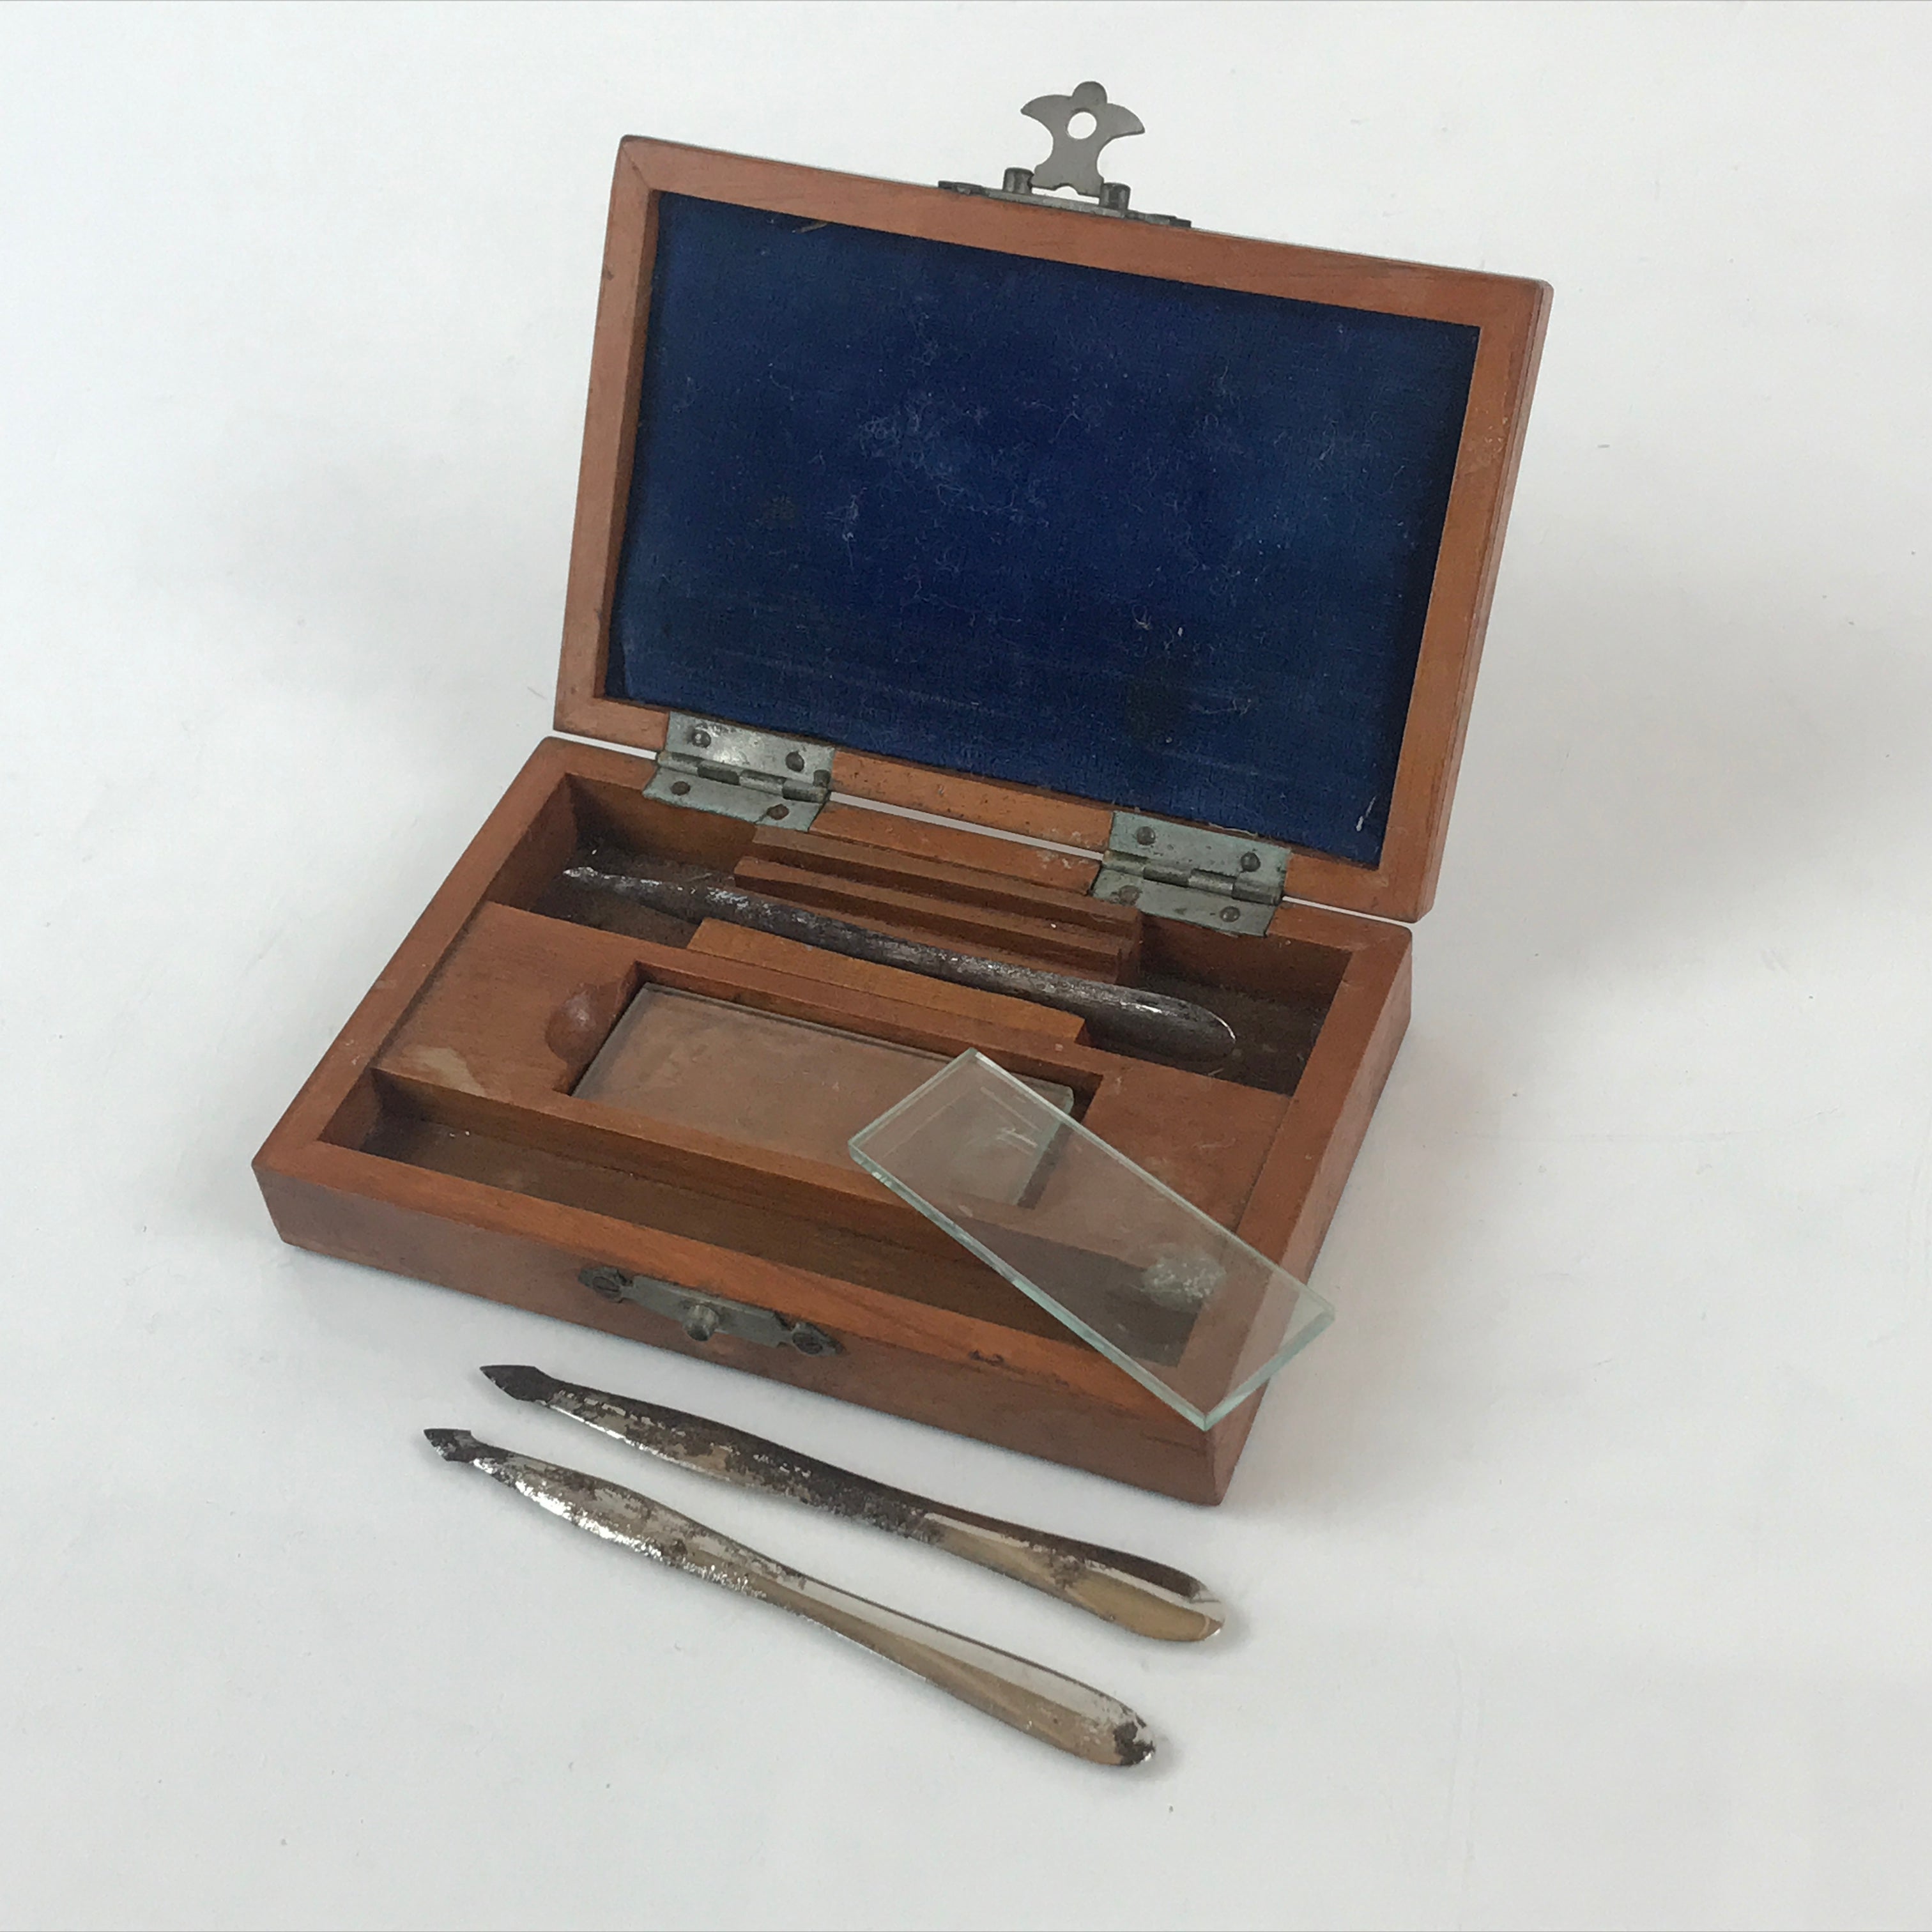 Japanese Experiment Tool Set with Wooden Case Inspection Military Medical JK488